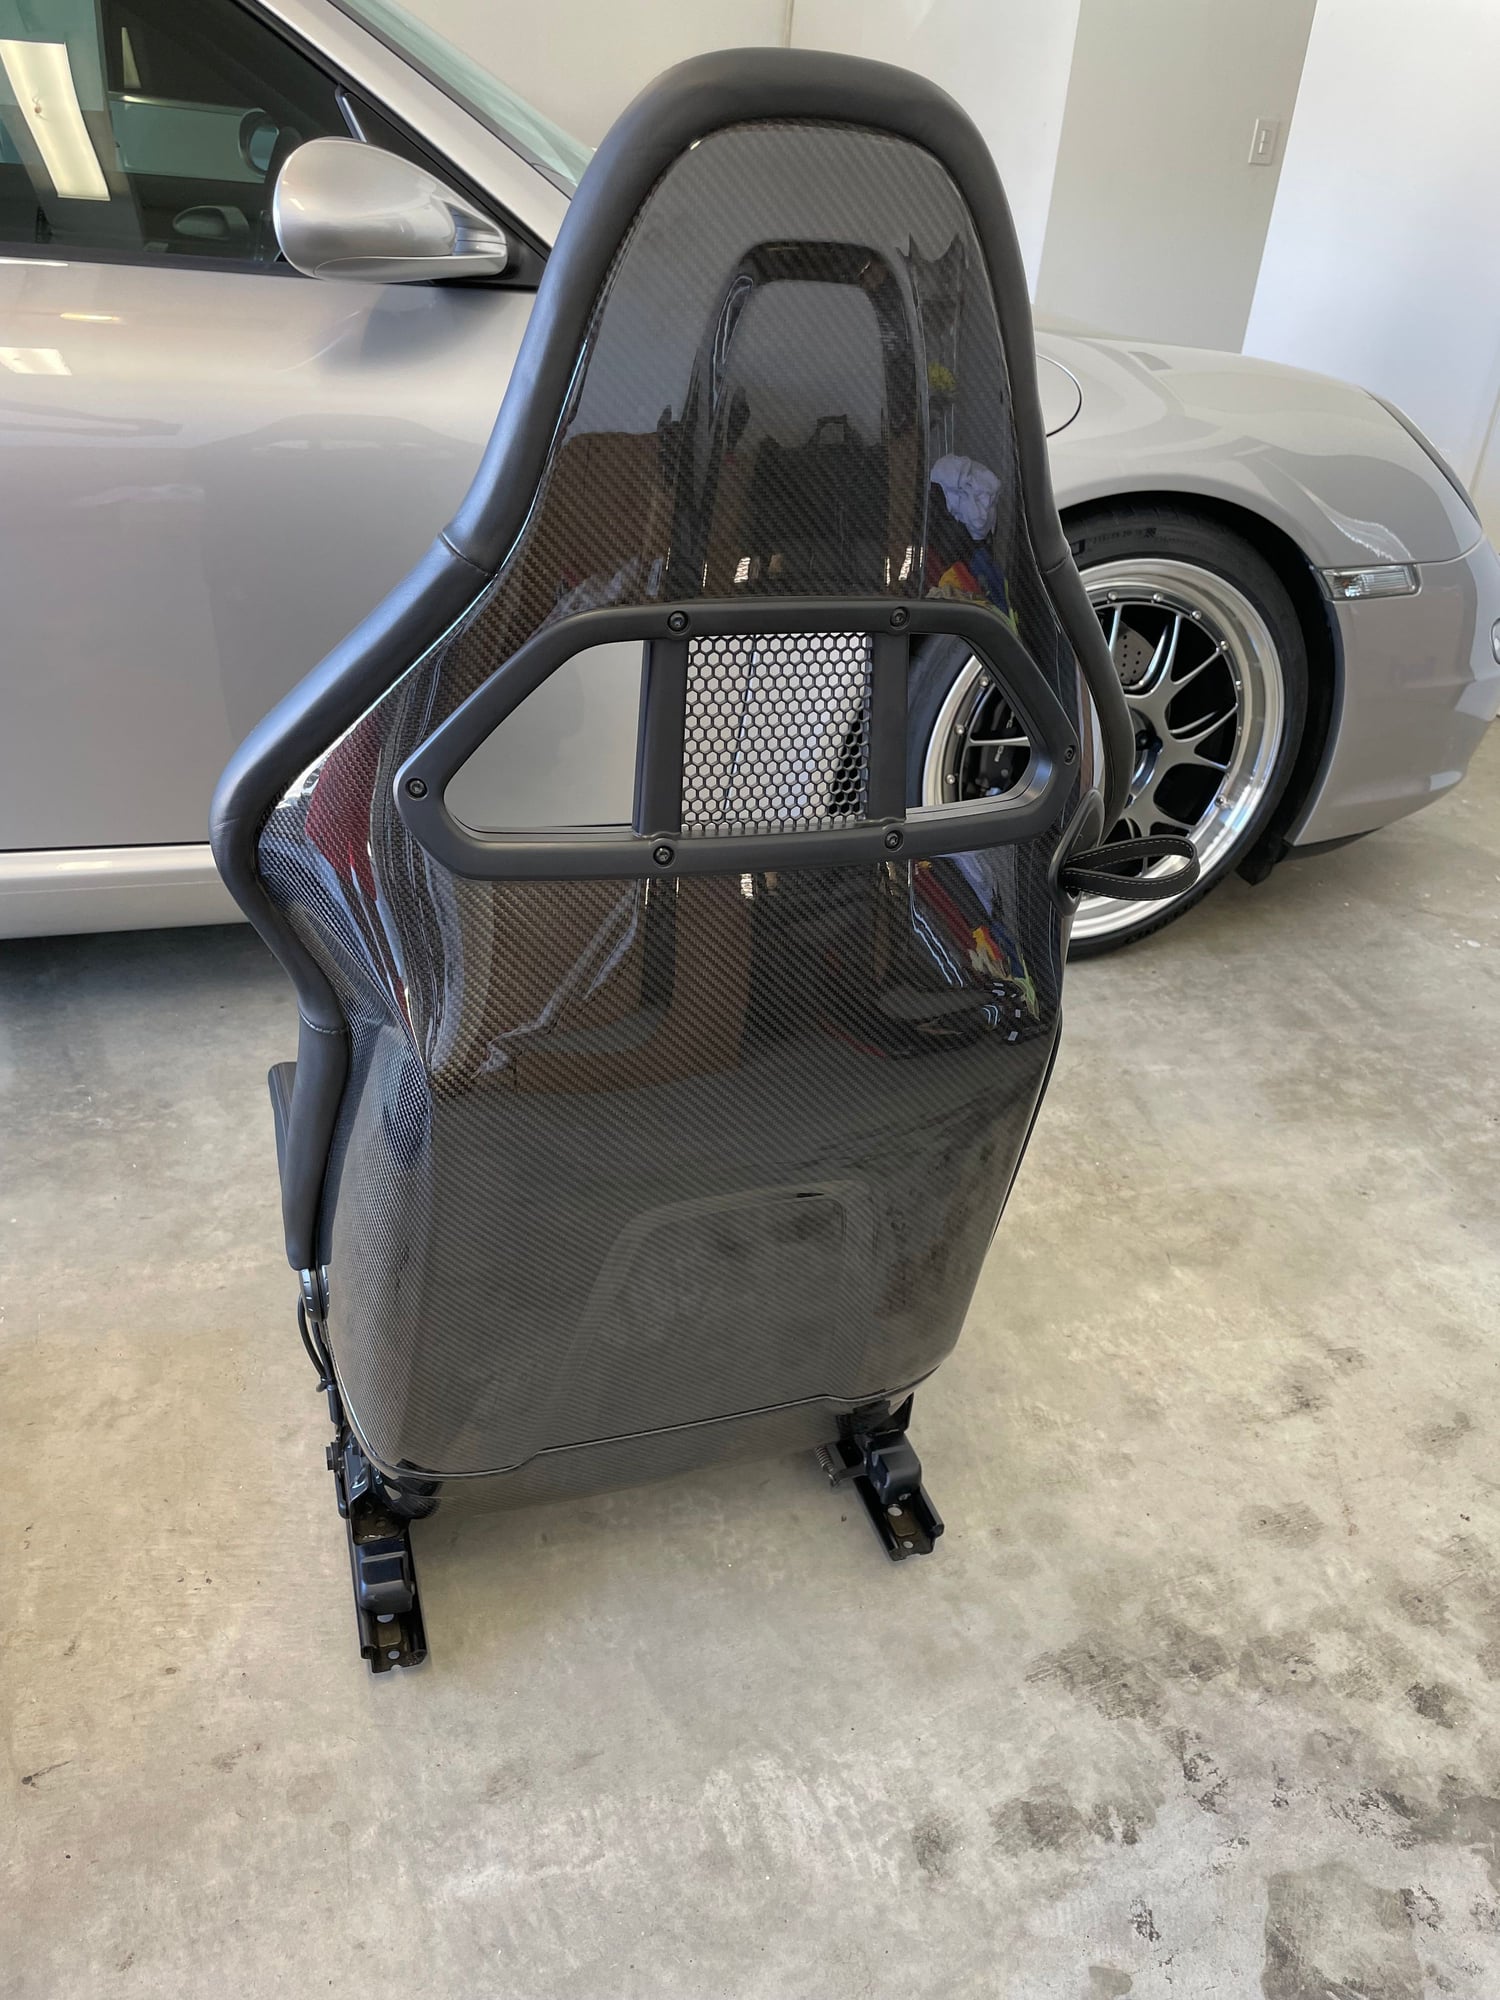 Interior/Upholstery - GT2/GT3 Lightweight Bucket Seats - Used - 2005 to 2012 Porsche 911 - City Of Industry, CA 91789, United States